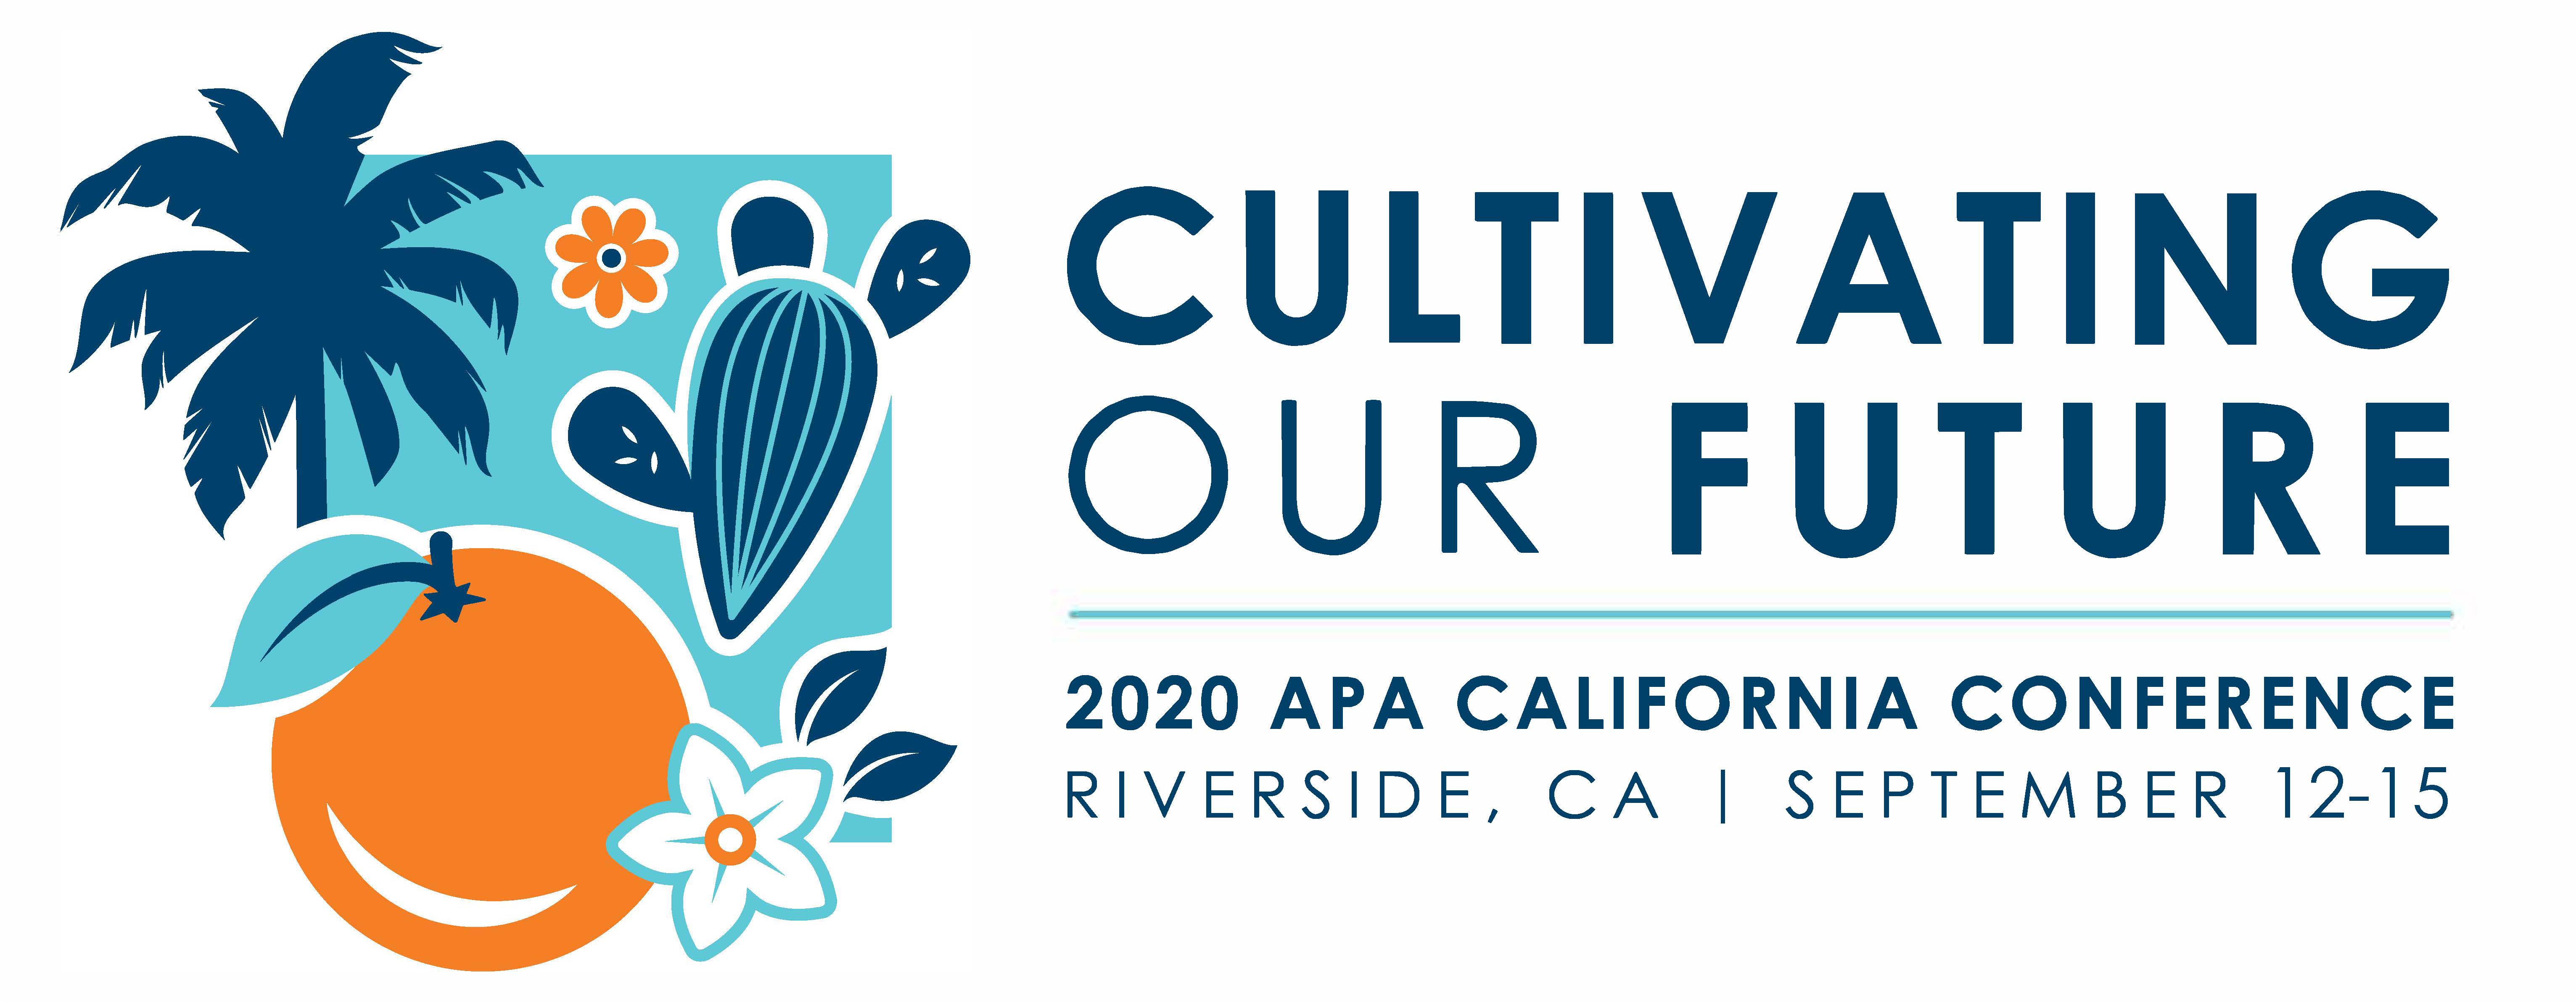 APACA2020 Cultivating Our Future American Planning Association